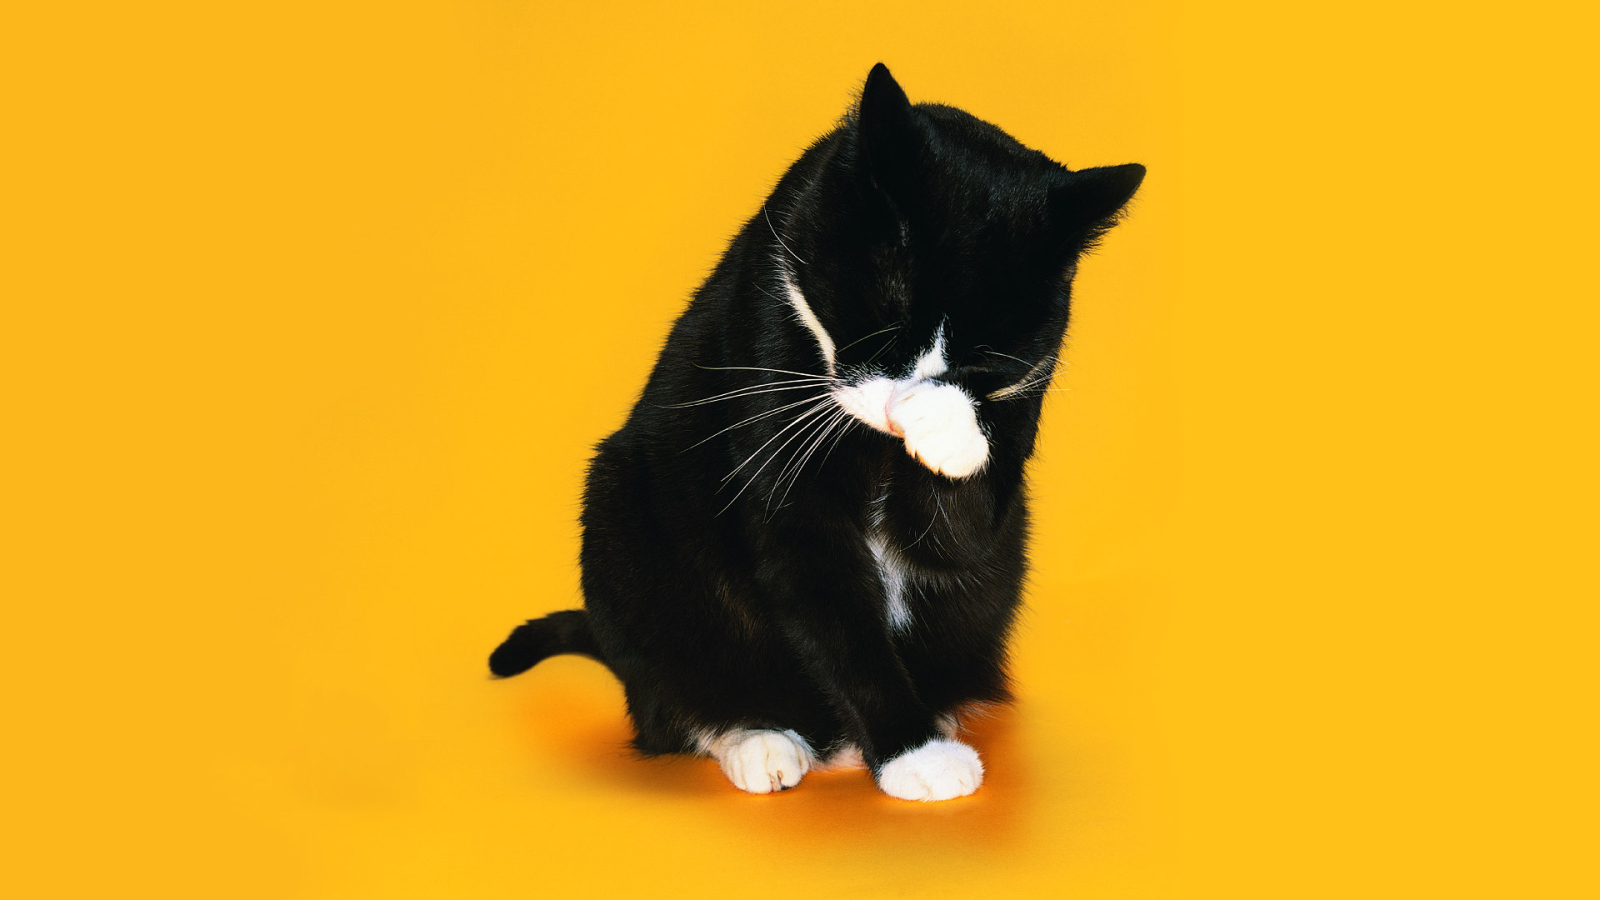 Black and white cat washes on a yellow background